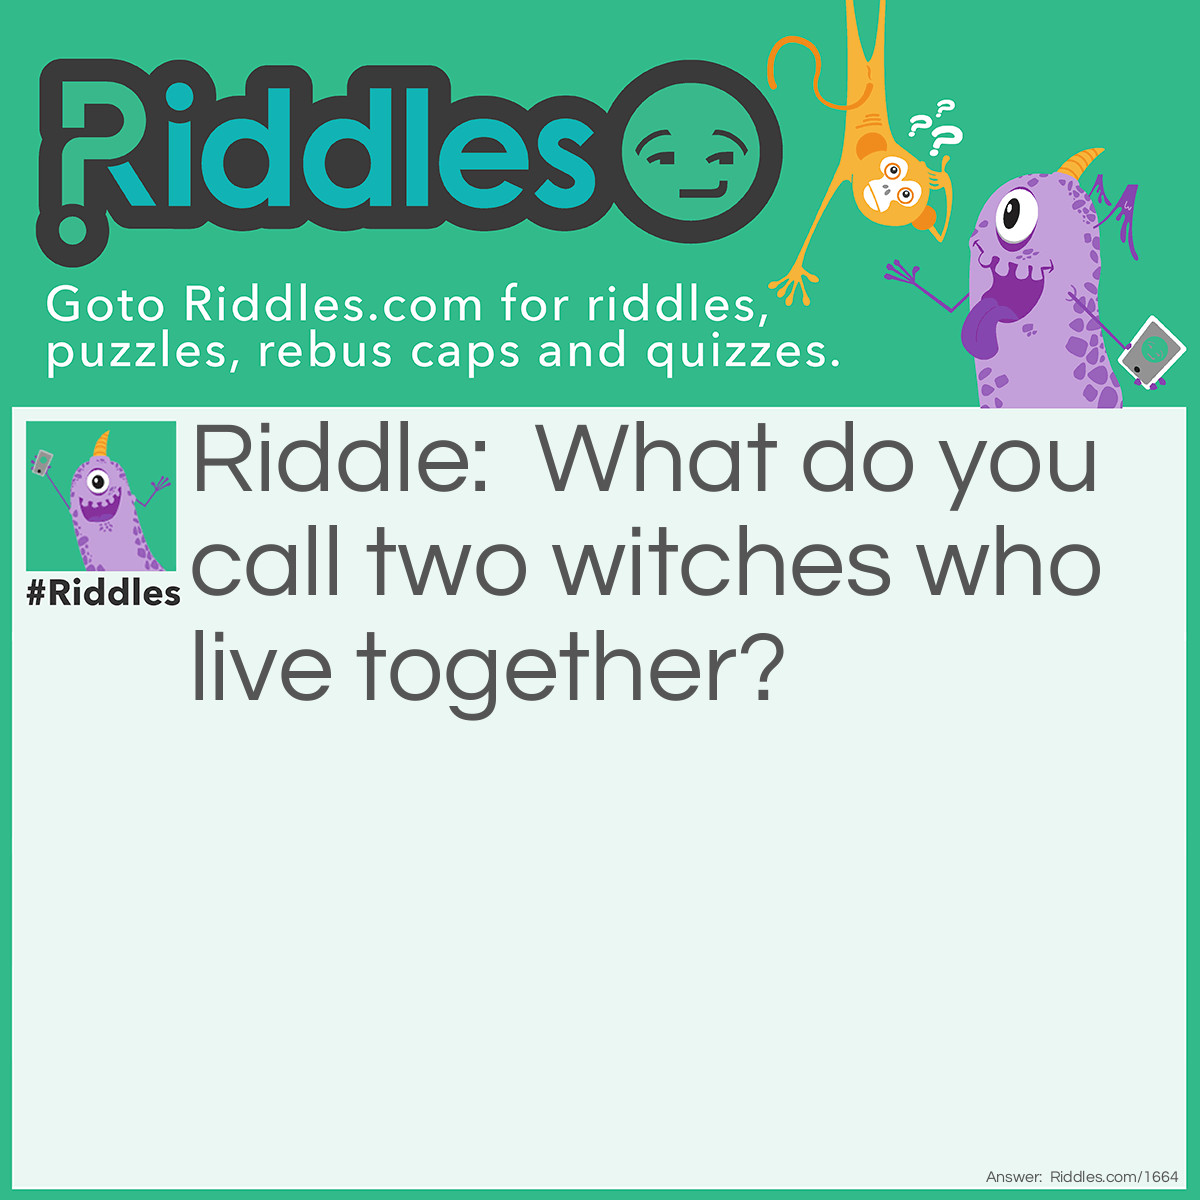 Riddle: What do you call two witches who live together? Answer: Broommates!